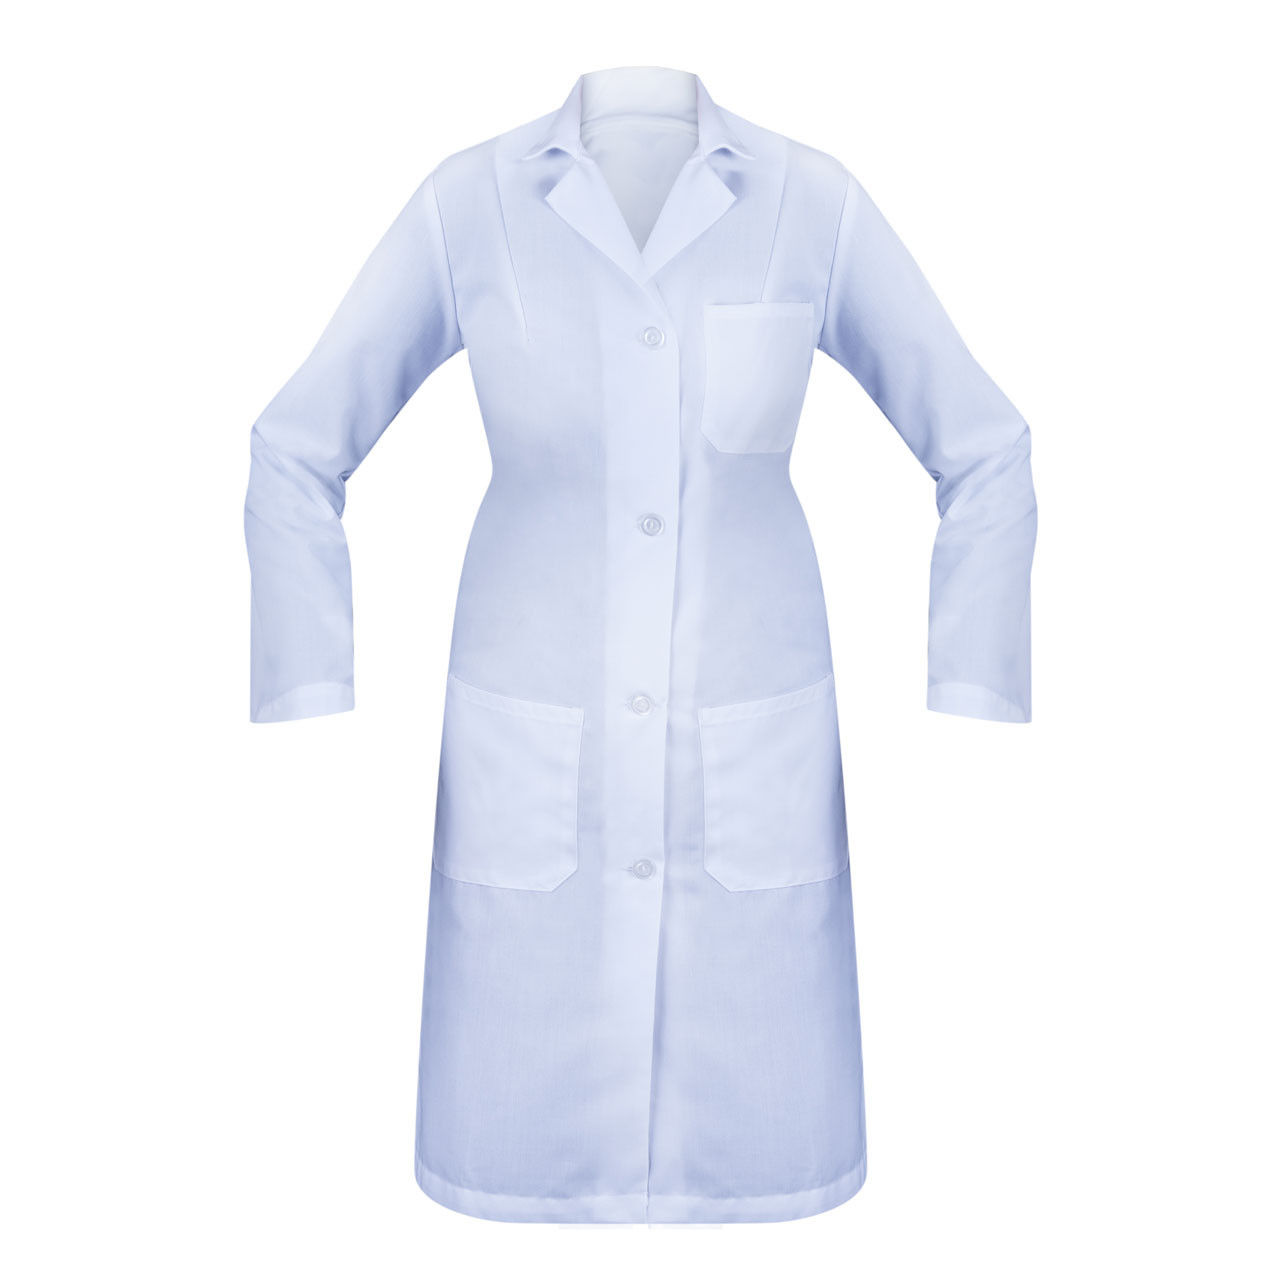 What material is the Female Lab Coat made of?